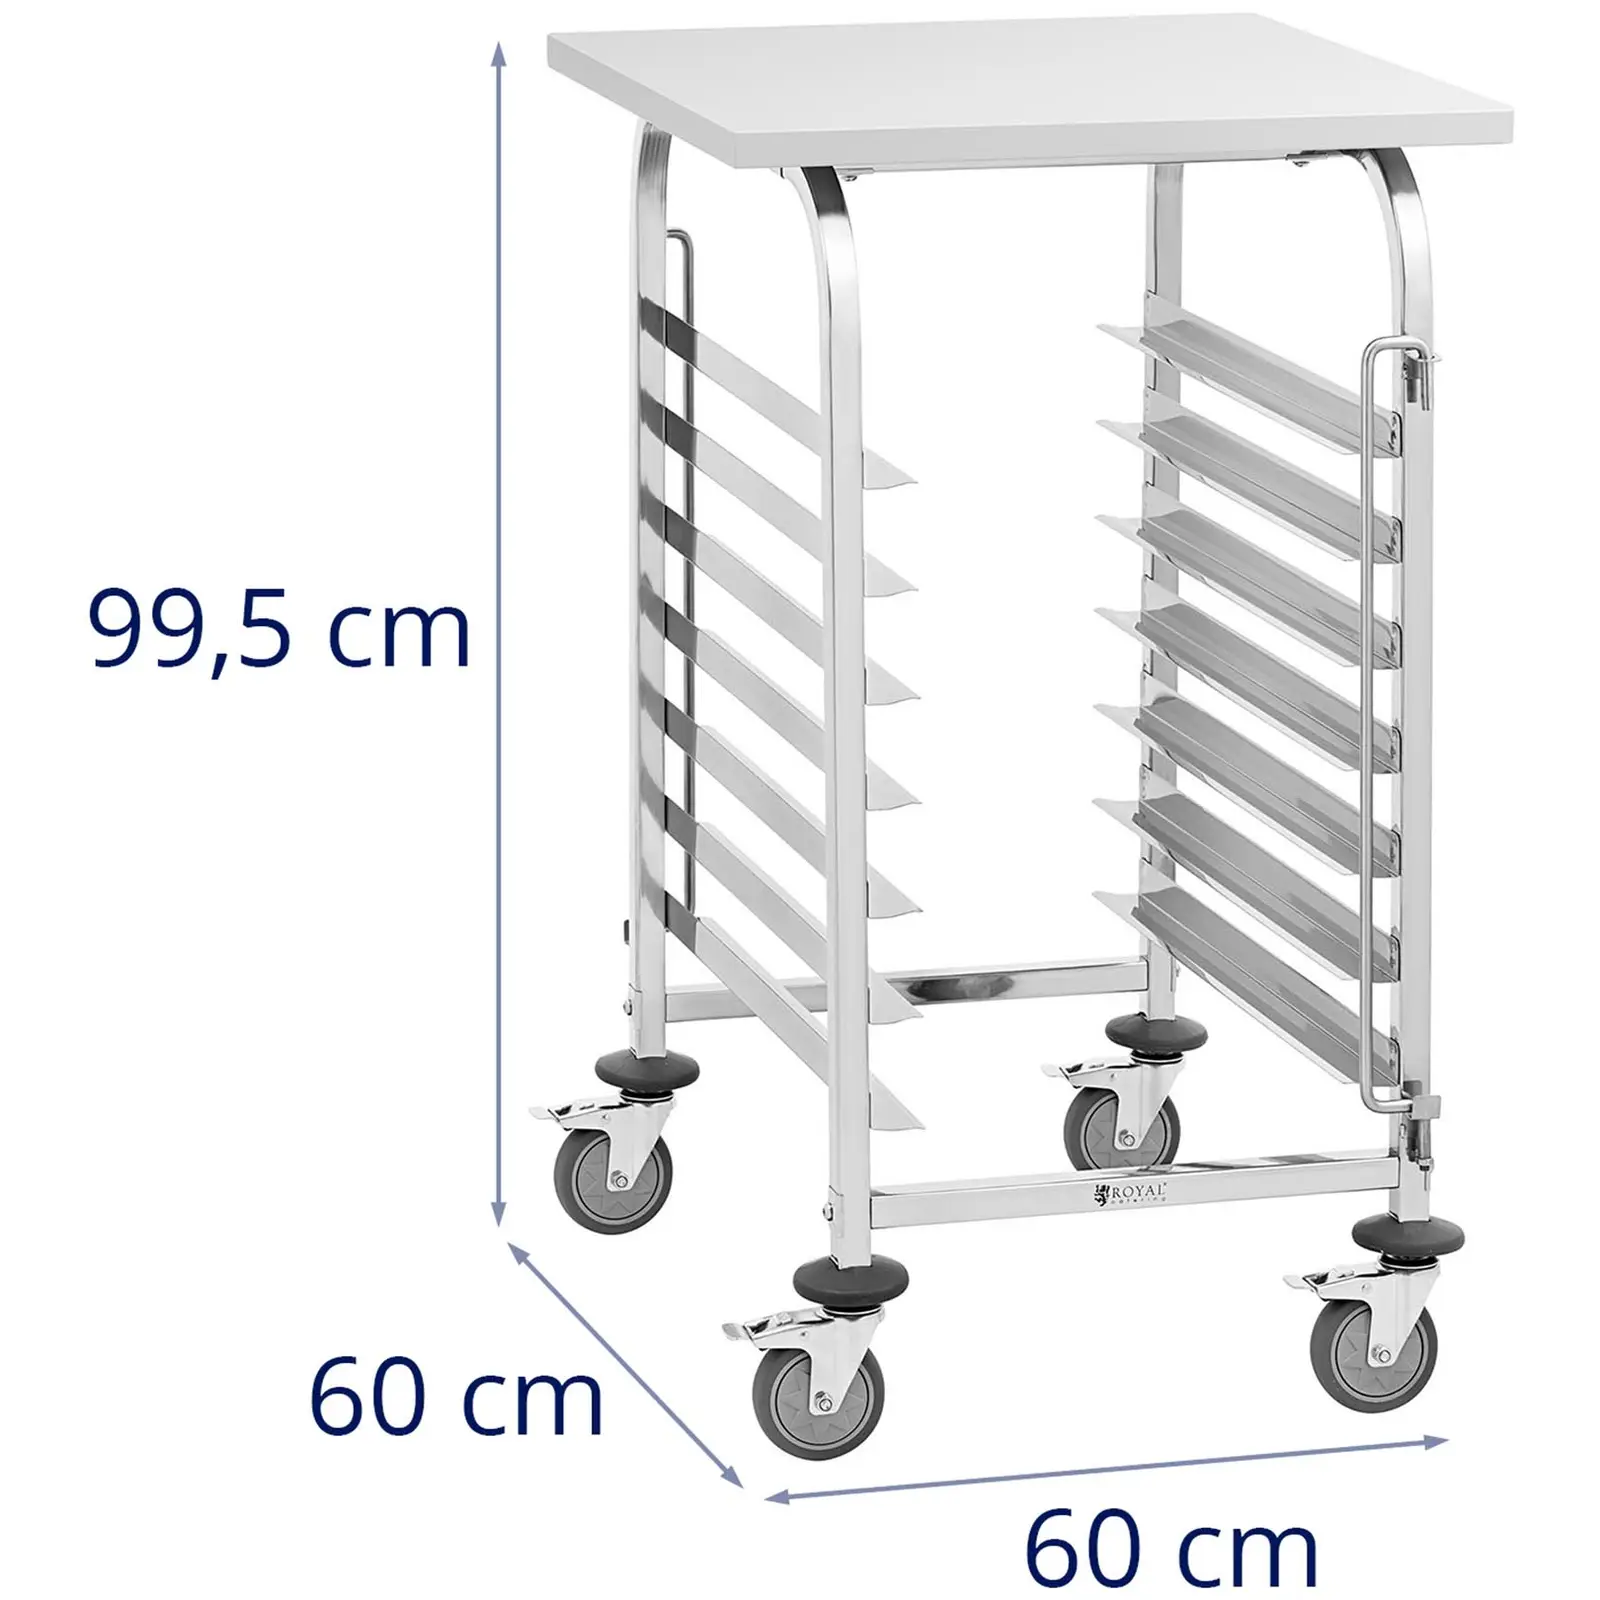 Tray Trolley - 7 shelves + tray - stainless steel - Royal Catering